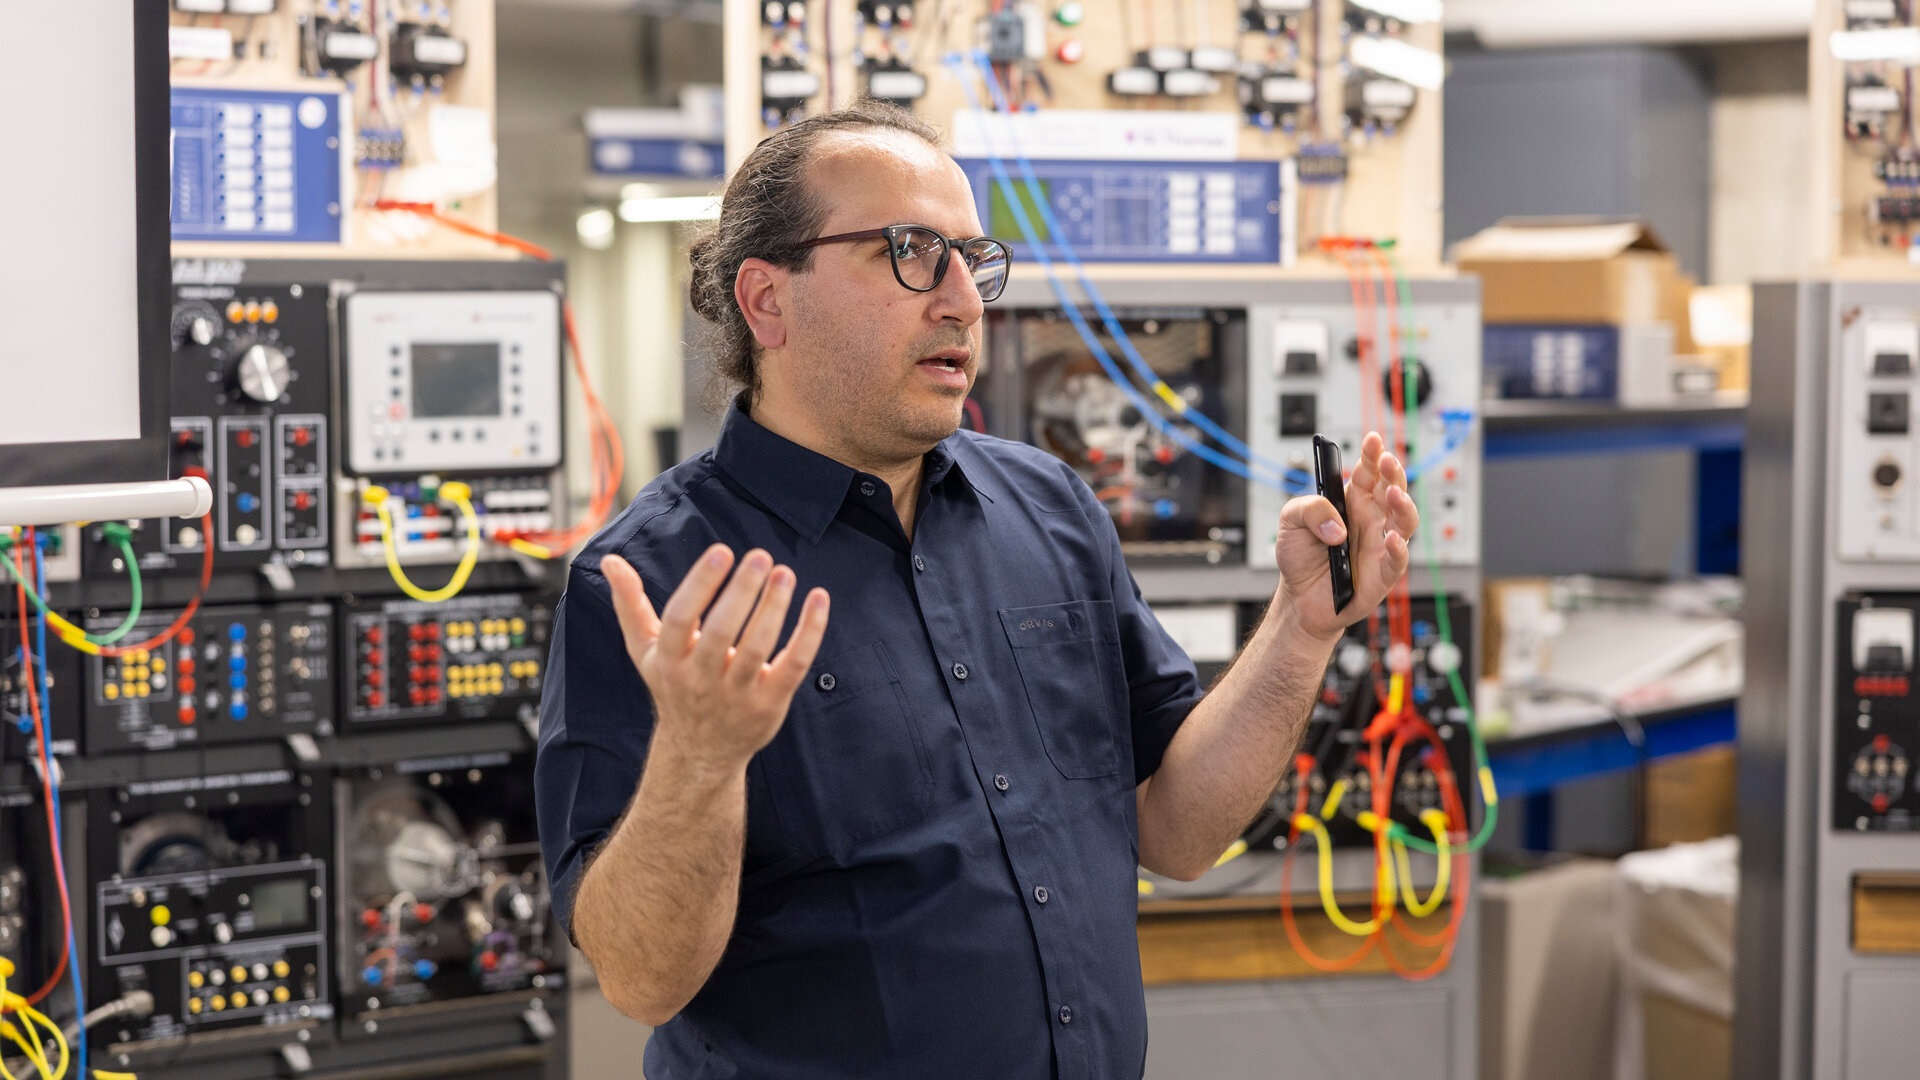 Dr. Mahmoud Kabalan stands in front of microgrid equipment.